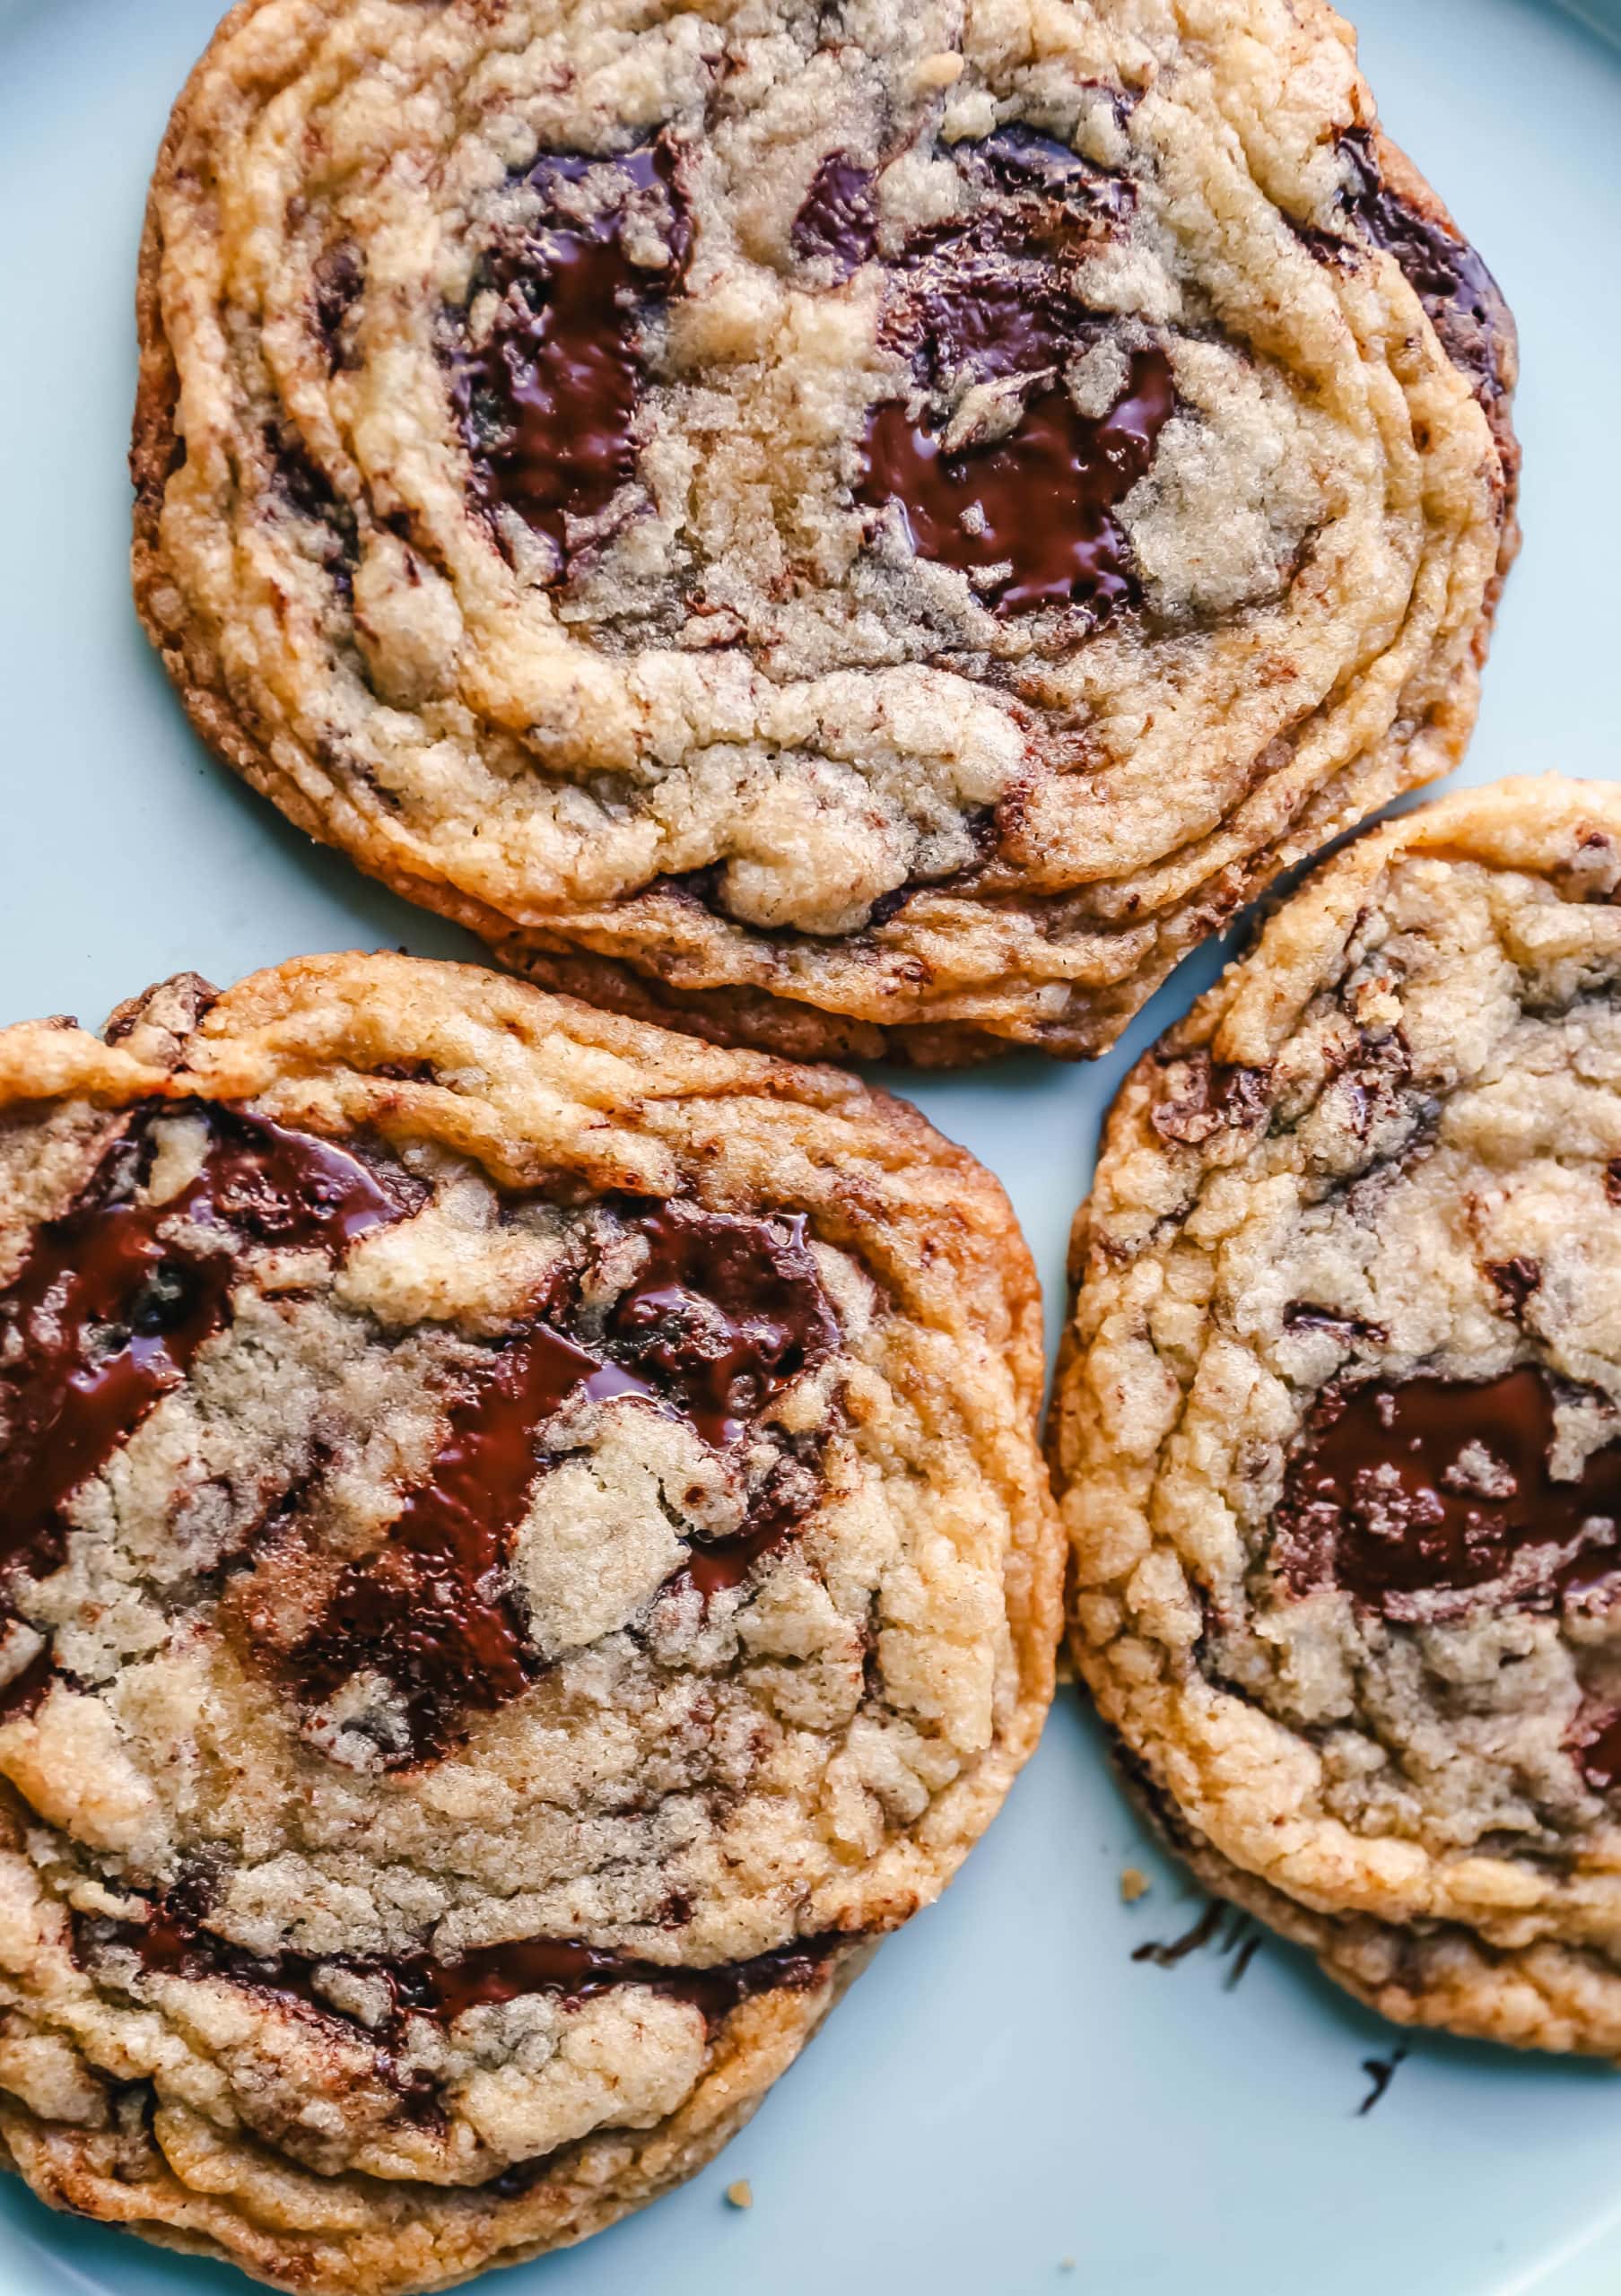 Pan Banging Chocolate Chip Cookies The famous pan banging chocolate chip cookies are thin and crispy with decadent melted dark chocolate and buttery, crispy edges and a chewy center. www.modernhoney.com #cookie #cookies #chocolatechipcookies #panbanging #panbangingcookies